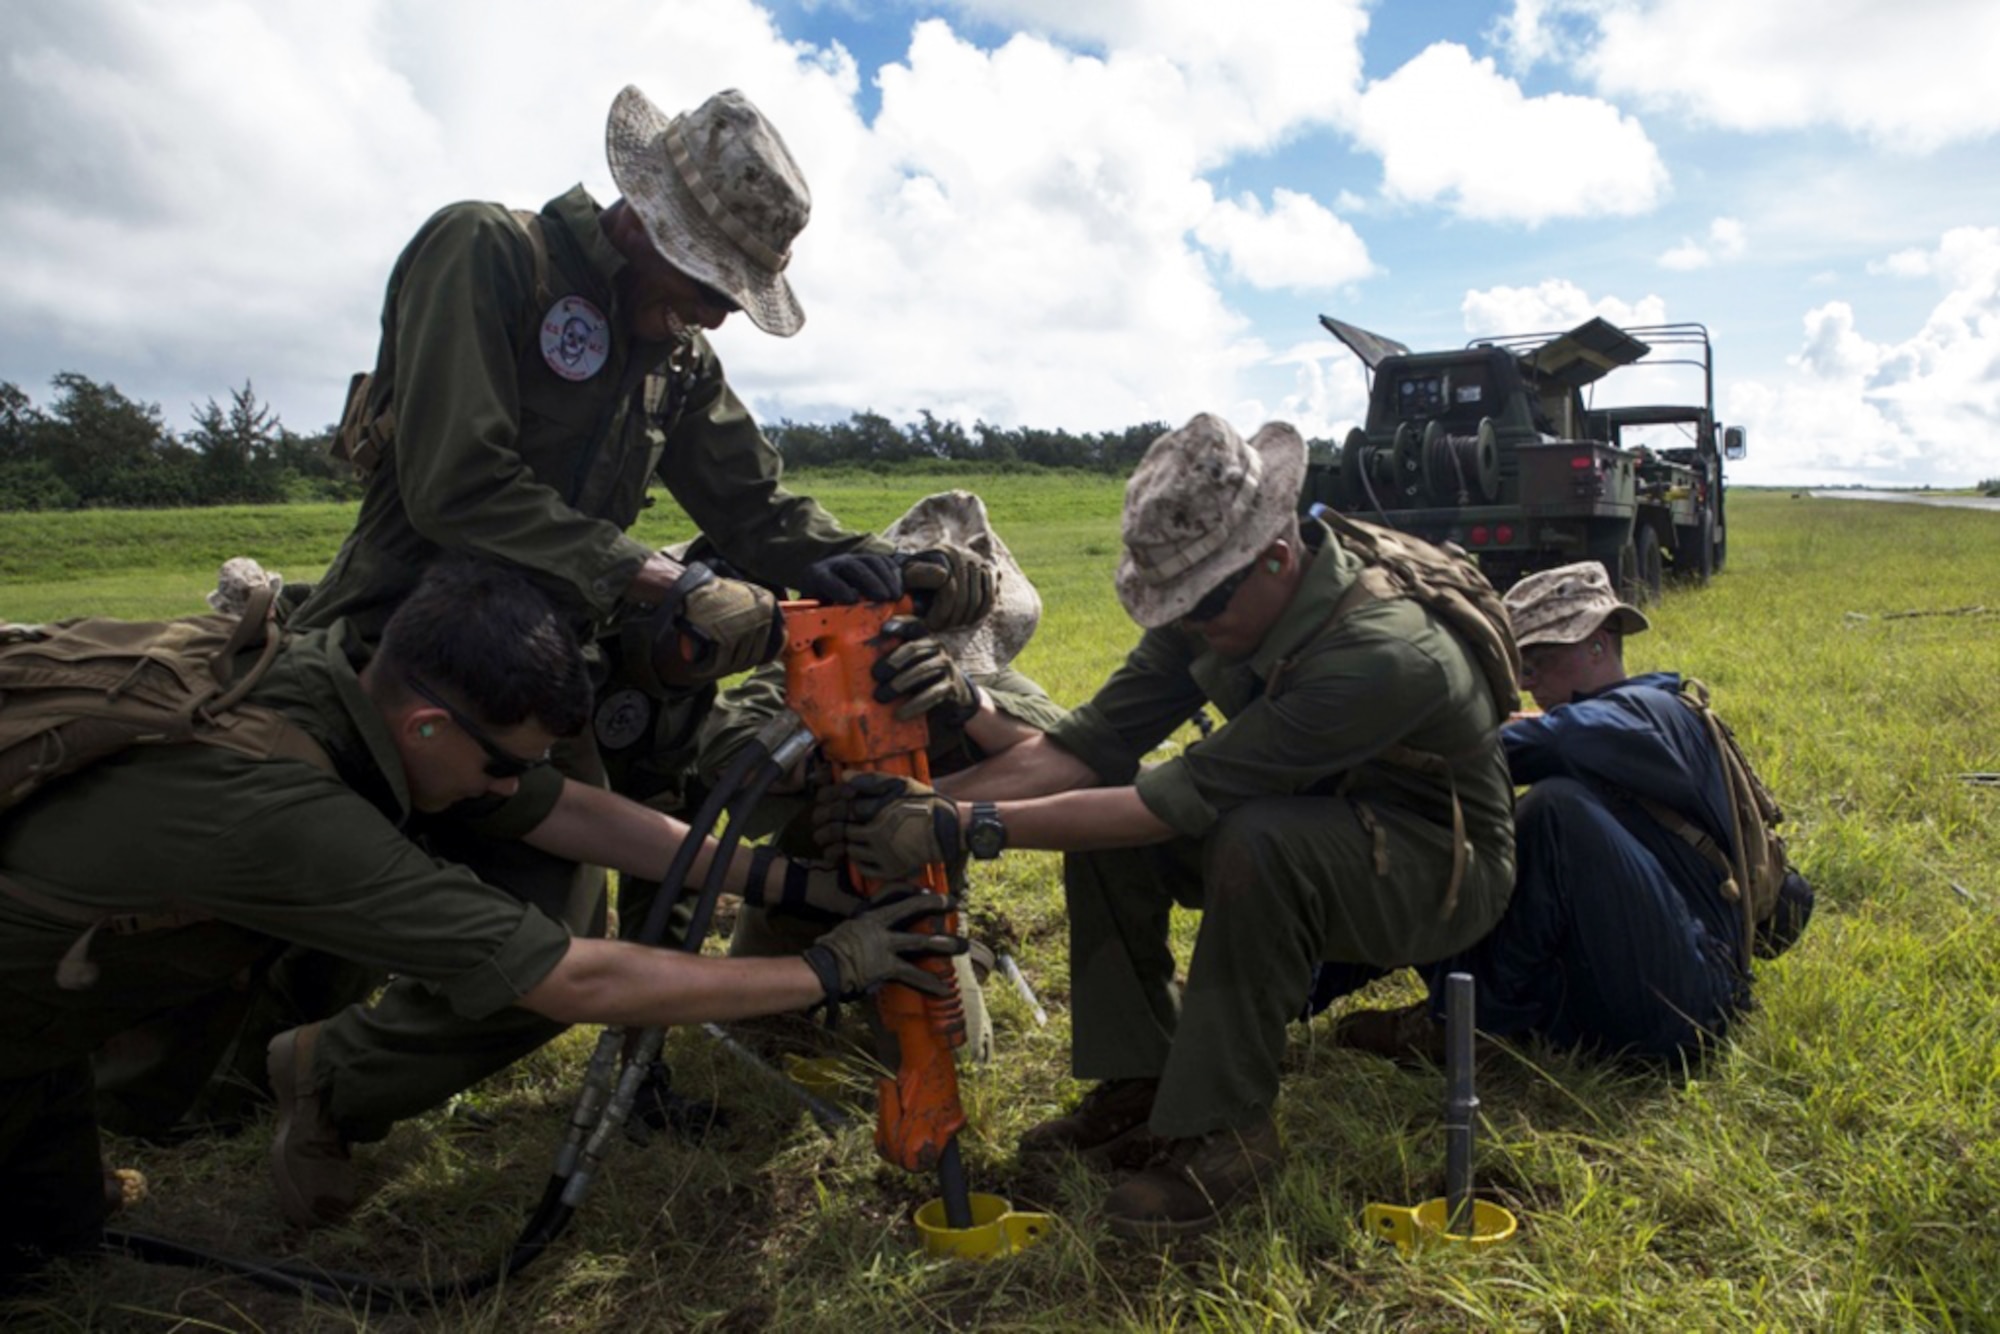 Marine expeditionary airfield systems technicians use a jackhammer to drive a steak into the ground as part of the M31 Marine Corps Expeditionary Arresting Gear System installation Sept. 6 at Tinian's West Field in preparation for Exercise Valiant Shield 2014. Arresting gear is used in order to land pilots in a short amount of space, or during an emergency. Valiant Shield is a biennial exercise which focuses on training that enables real-world proficiency in sustaining joint forces. The Marines are with Marine Wing Support Squadron 171 and MWSS-172, both under Marine Aircraft Group 12, 1st Marine Aircraft Wing, III Marine Expeditionary Force. (U.S. Marine Corps photo by Cpl. David A. Walters/Released)